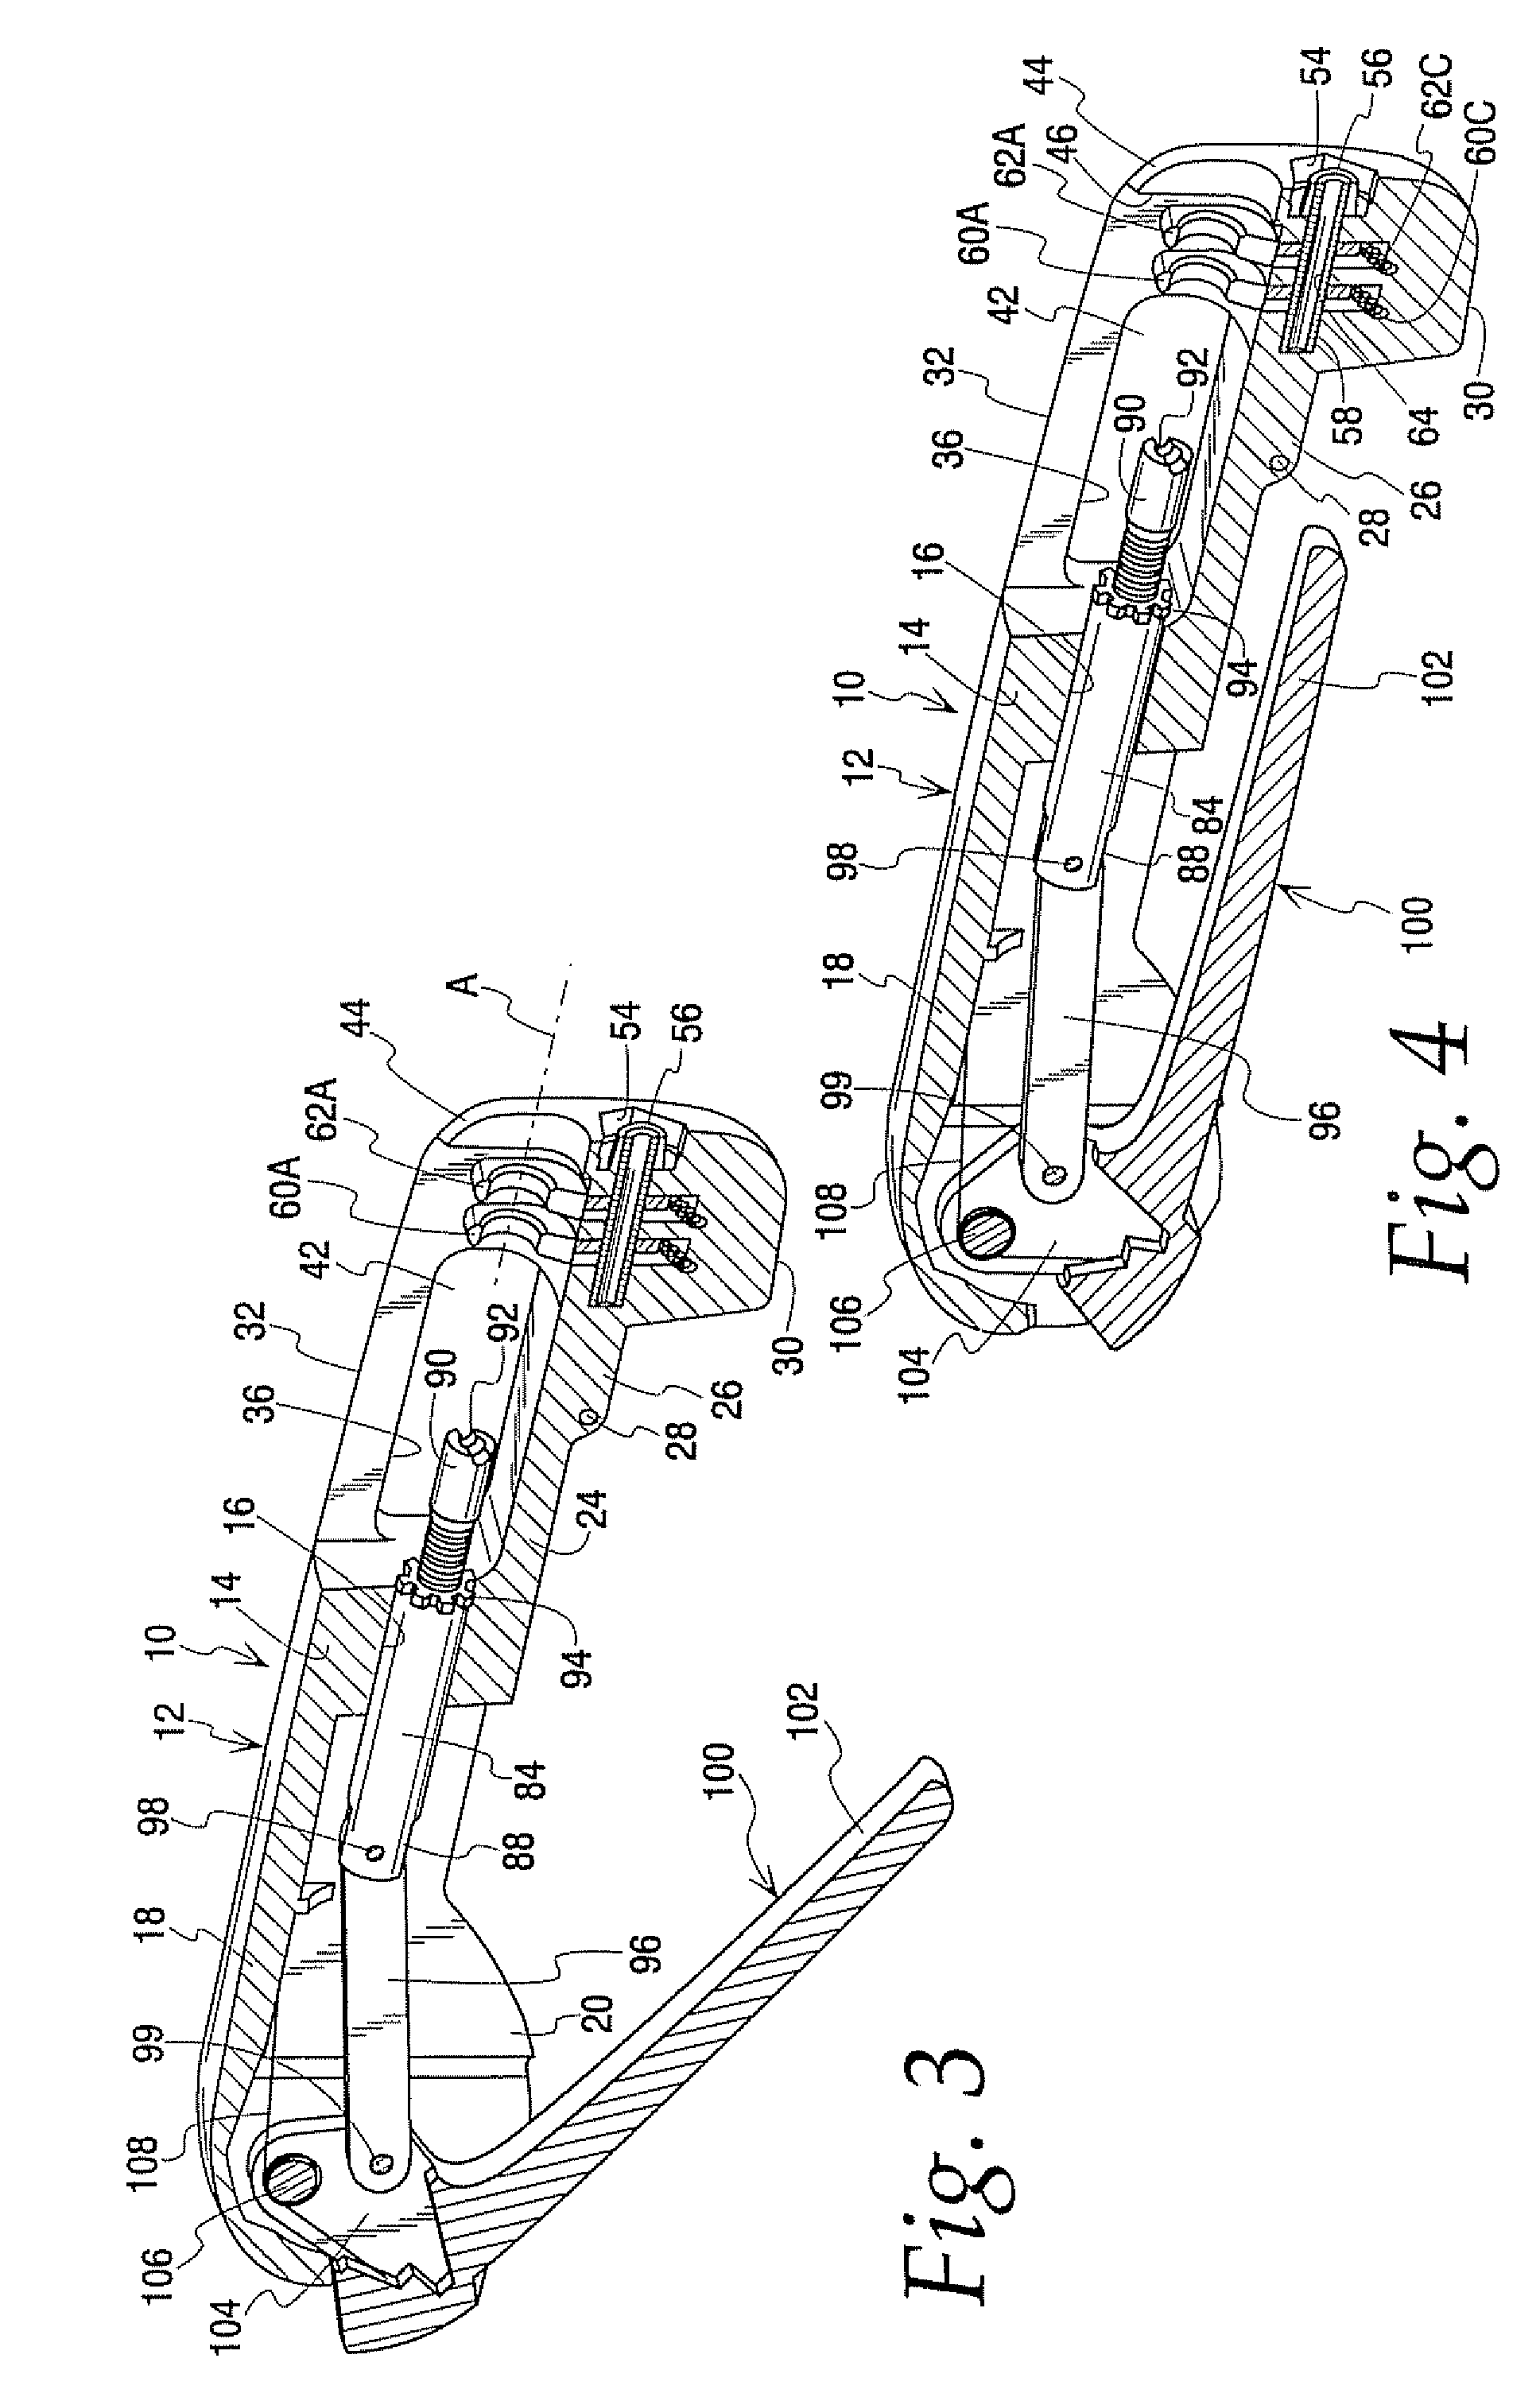 Application tool for coaxial cable compression connectors